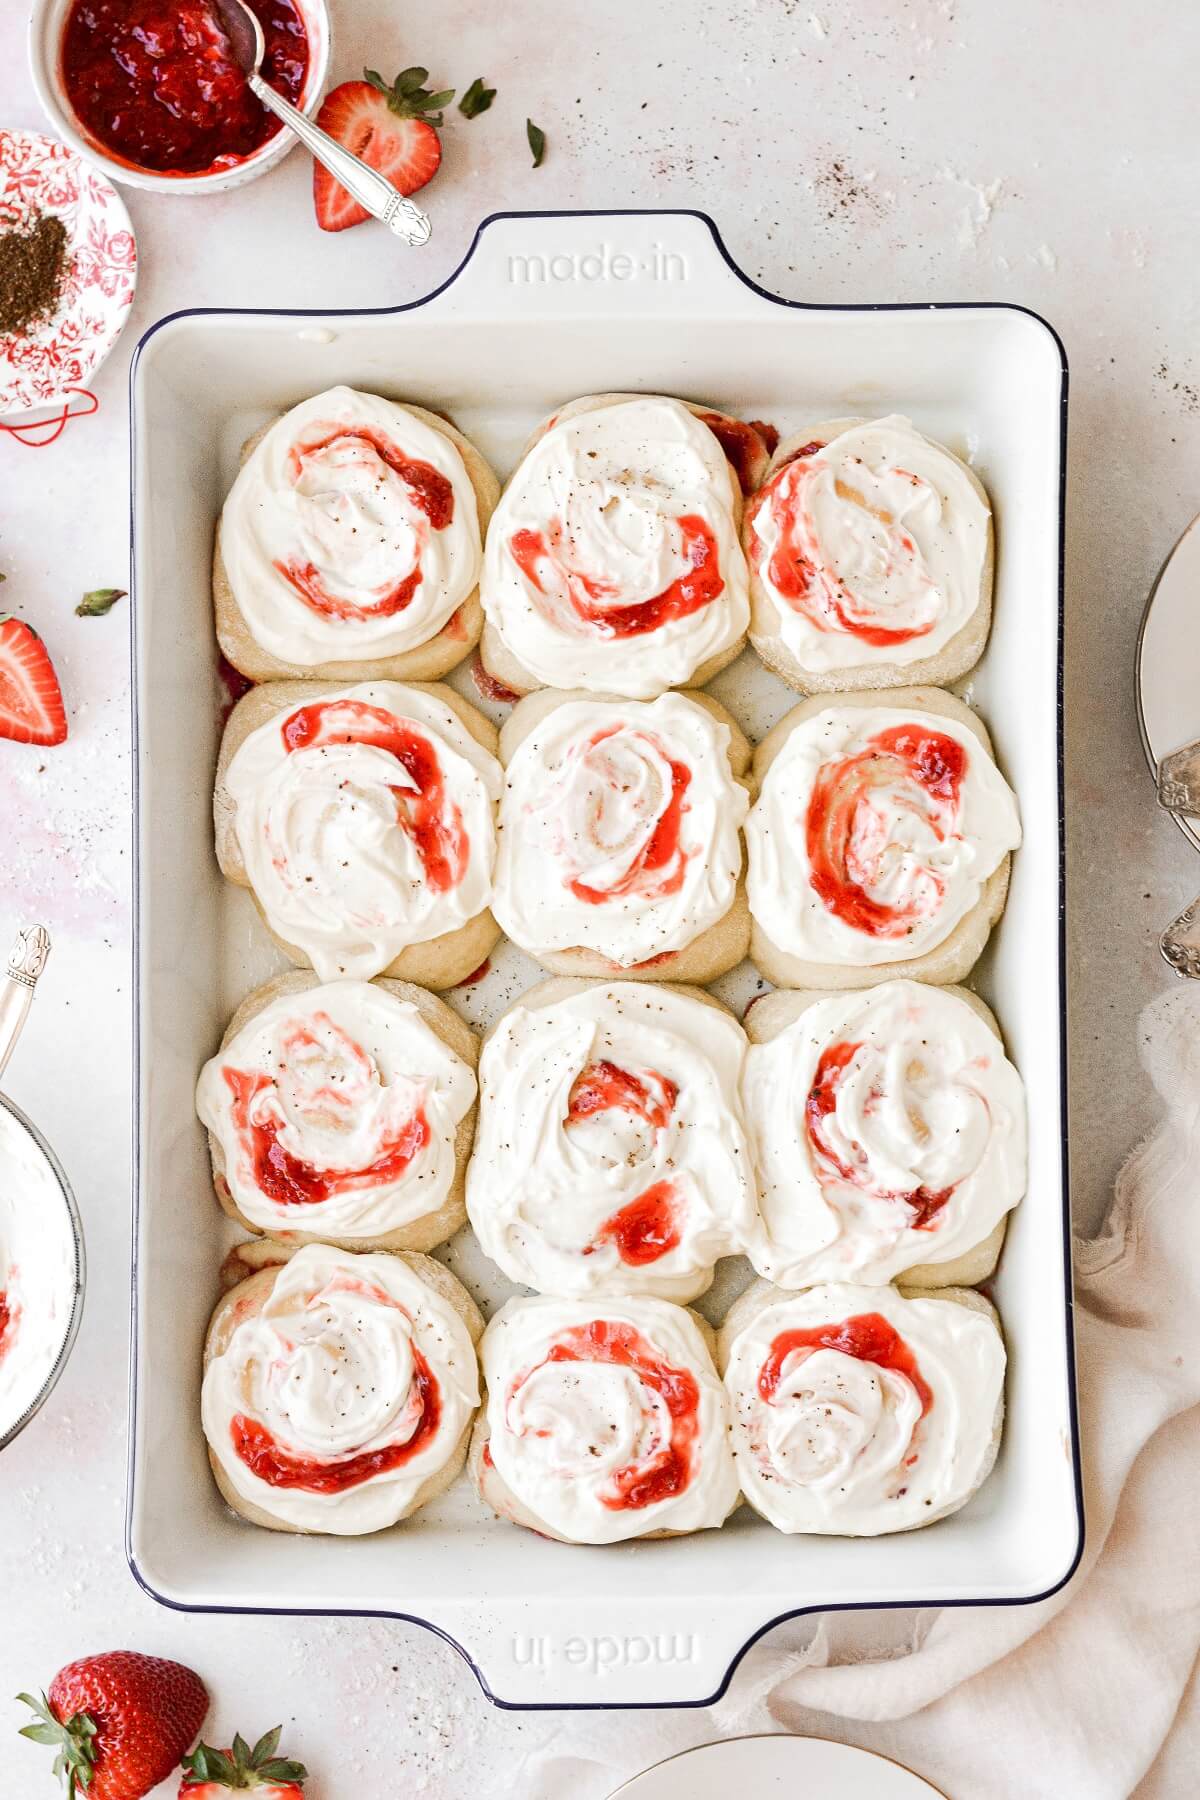 Twelve strawberry rolls in a baking pan, topped with cream cheese frosting.